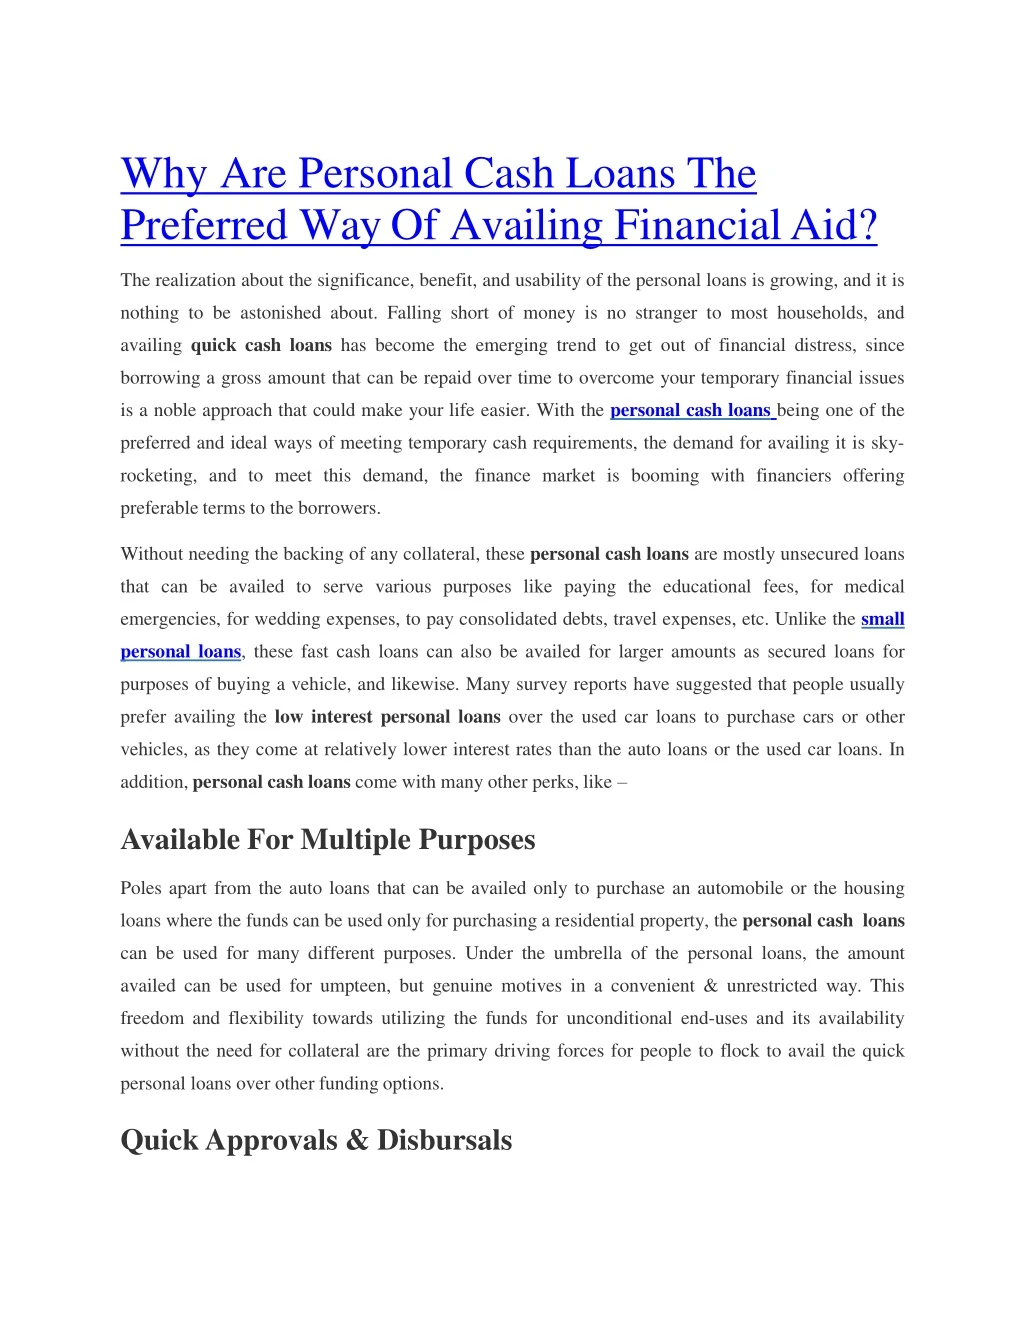 why are personal cash loans the preferred way of availing financial aid